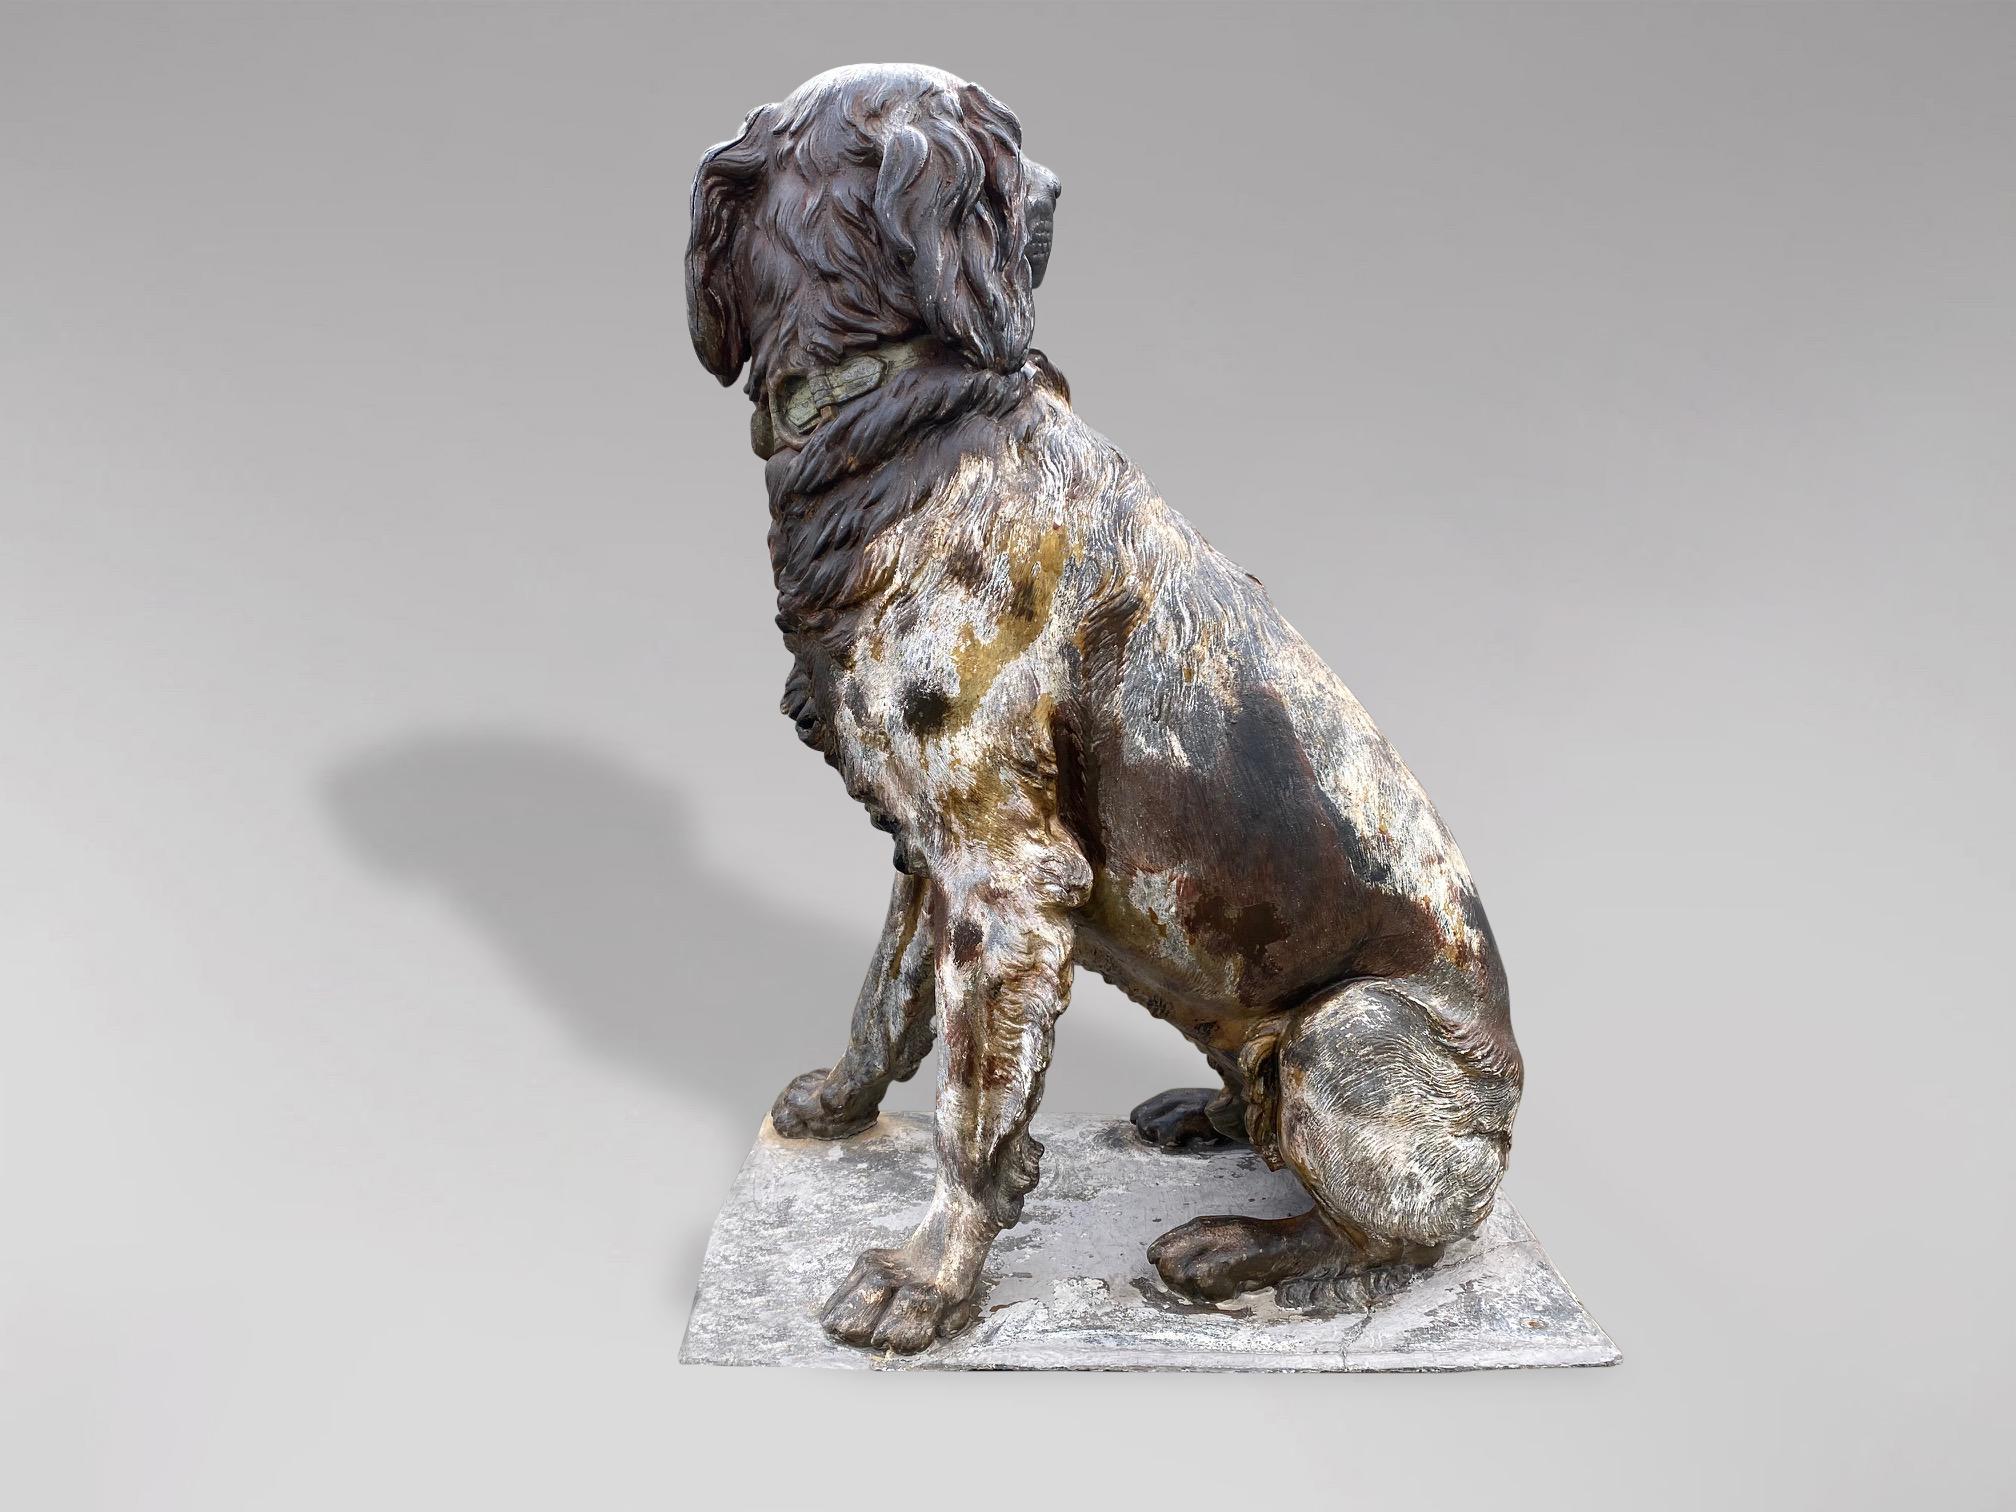 20th Century Life Size Cast Iron Statue of a Hunting Dog In Good Condition For Sale In Petworth,West Sussex, GB